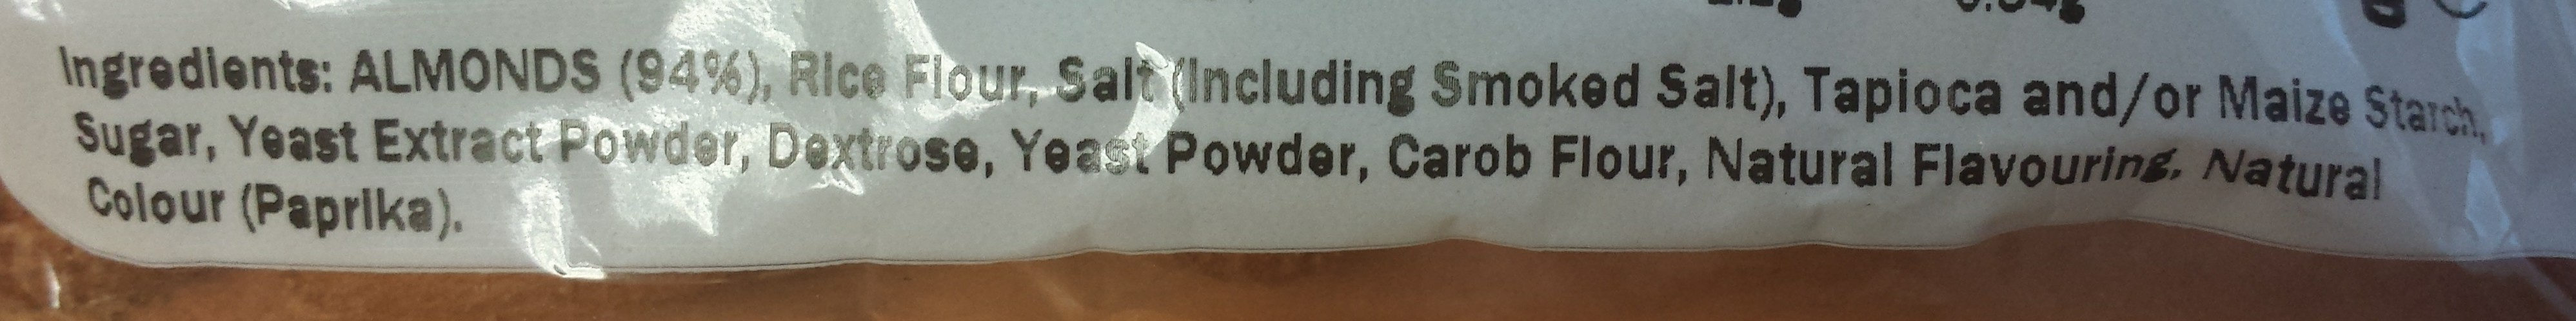 Snack Co Smoked Almonds - Ingredients